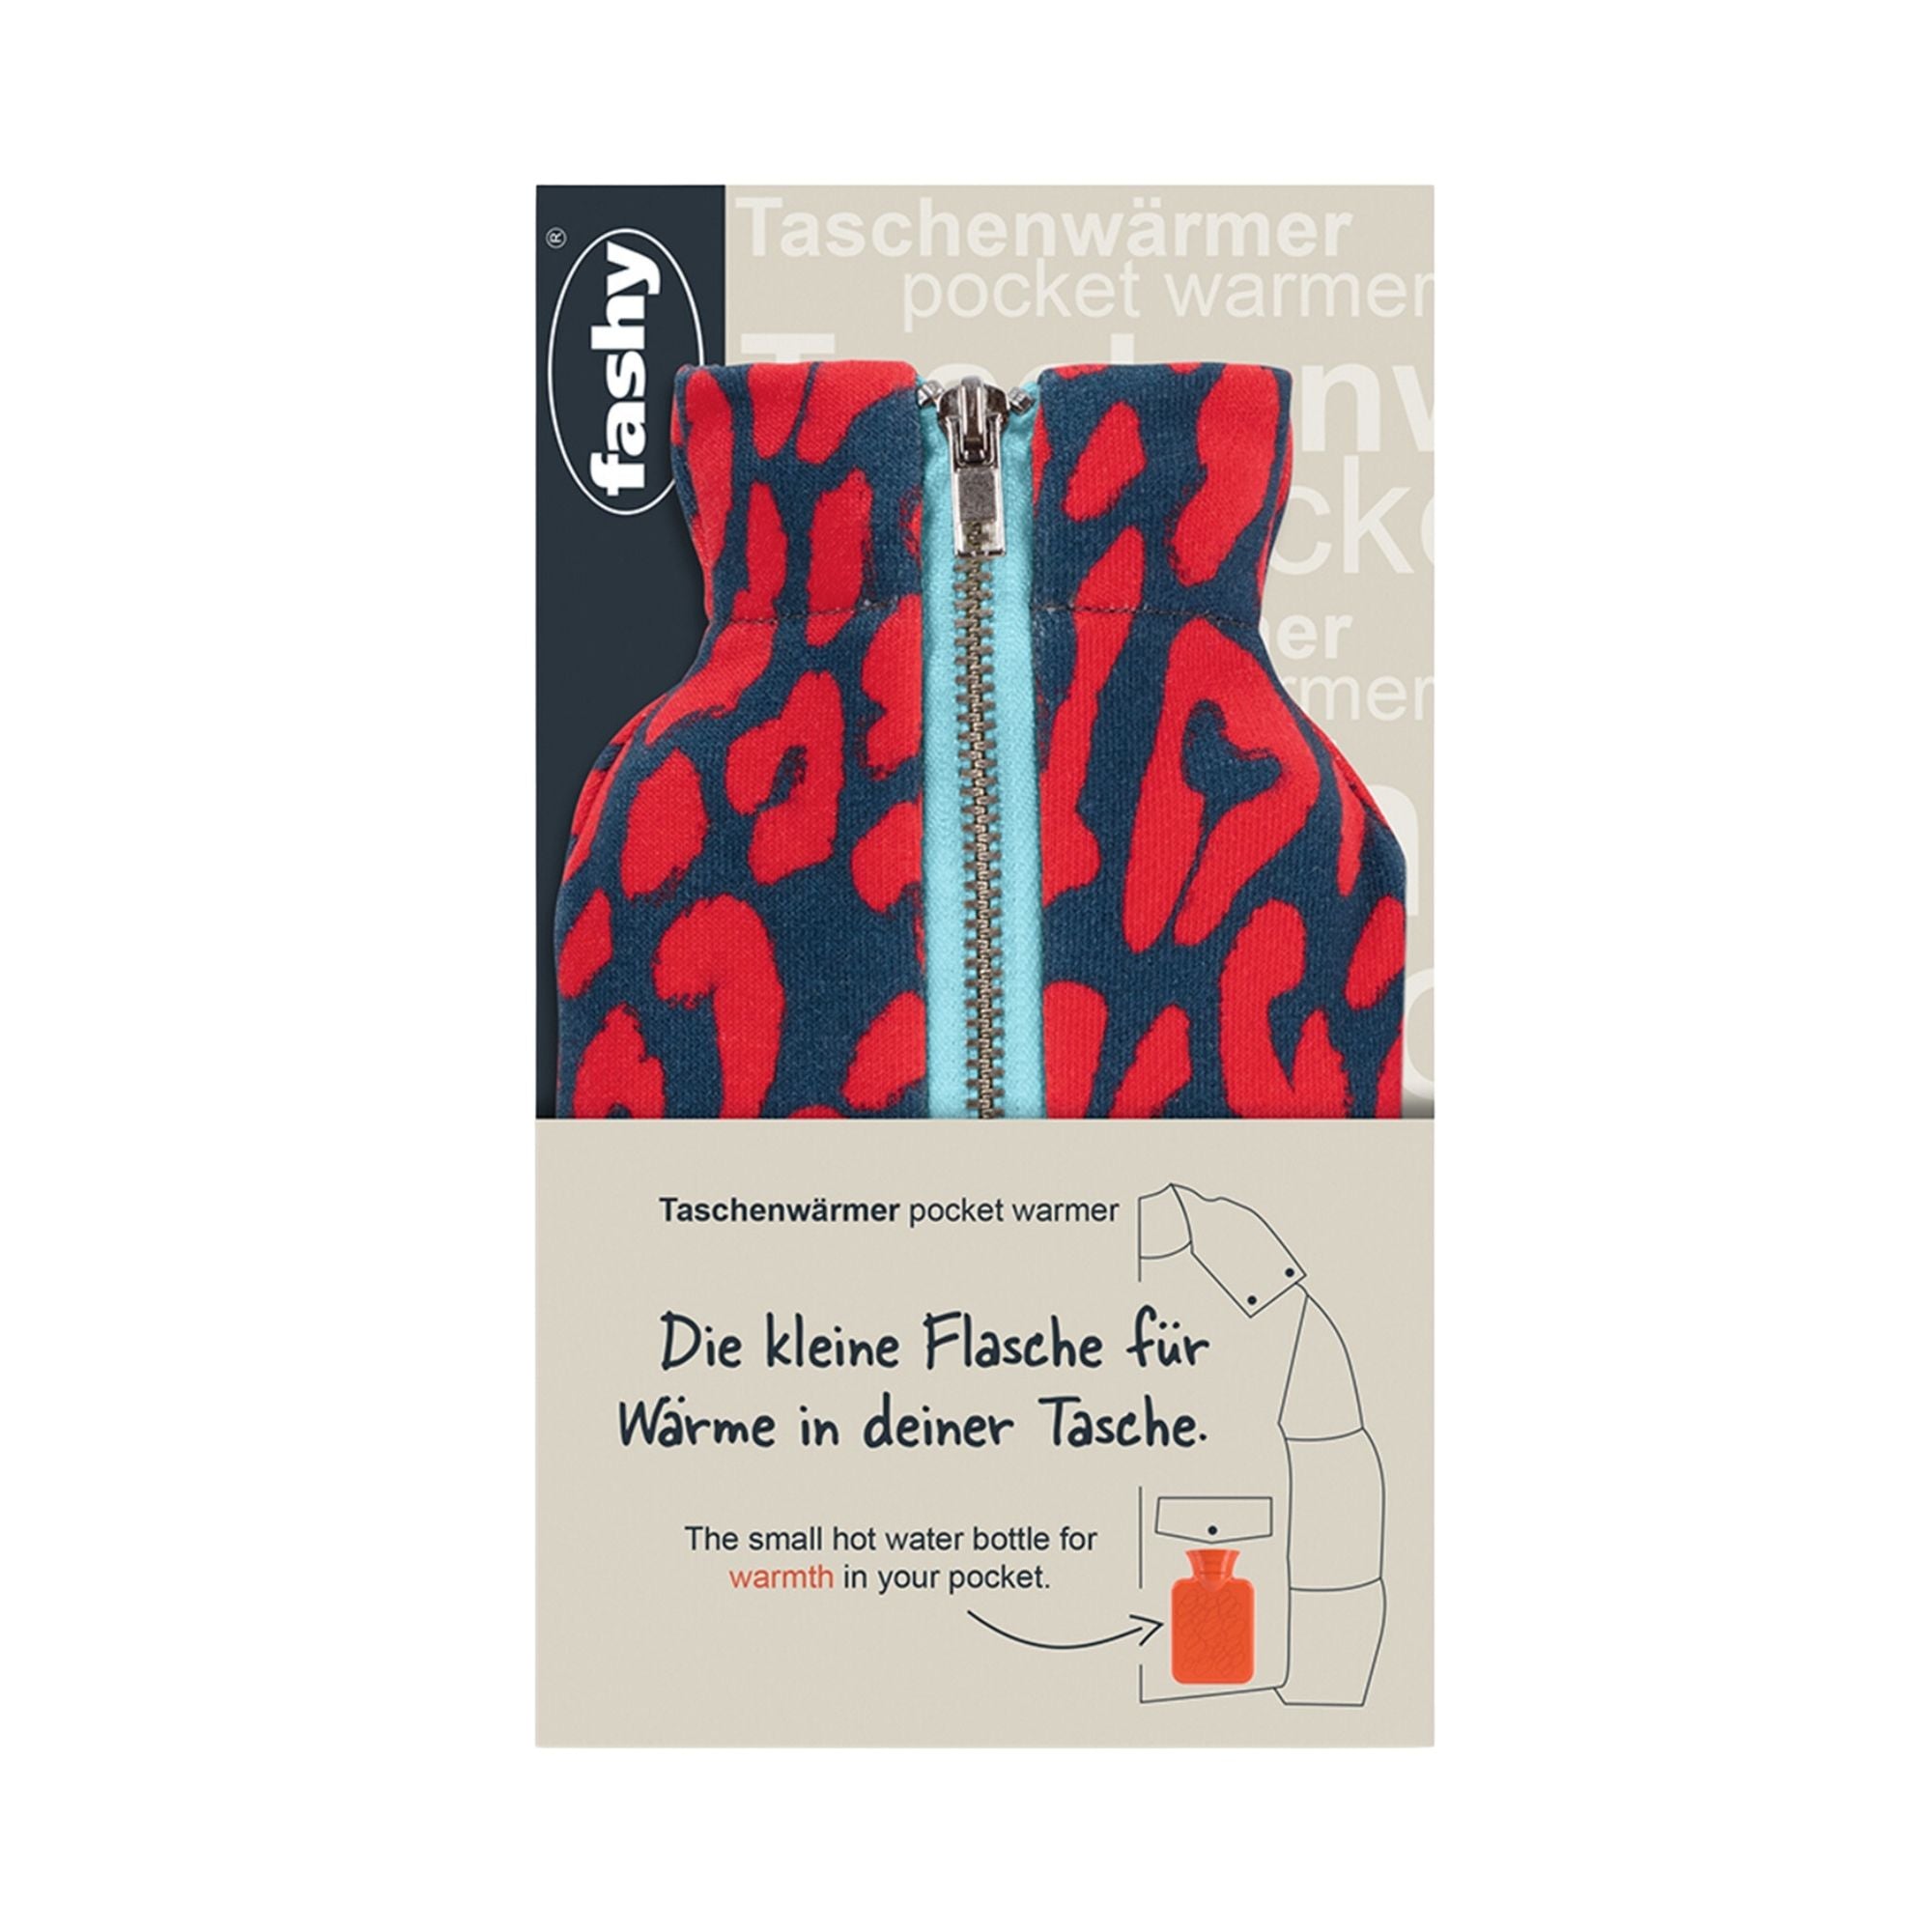 0.3 Litre Mini Hot Water Bottle Pocket Warmer with Blue and Red Leo Pattern Zip Cover In Box